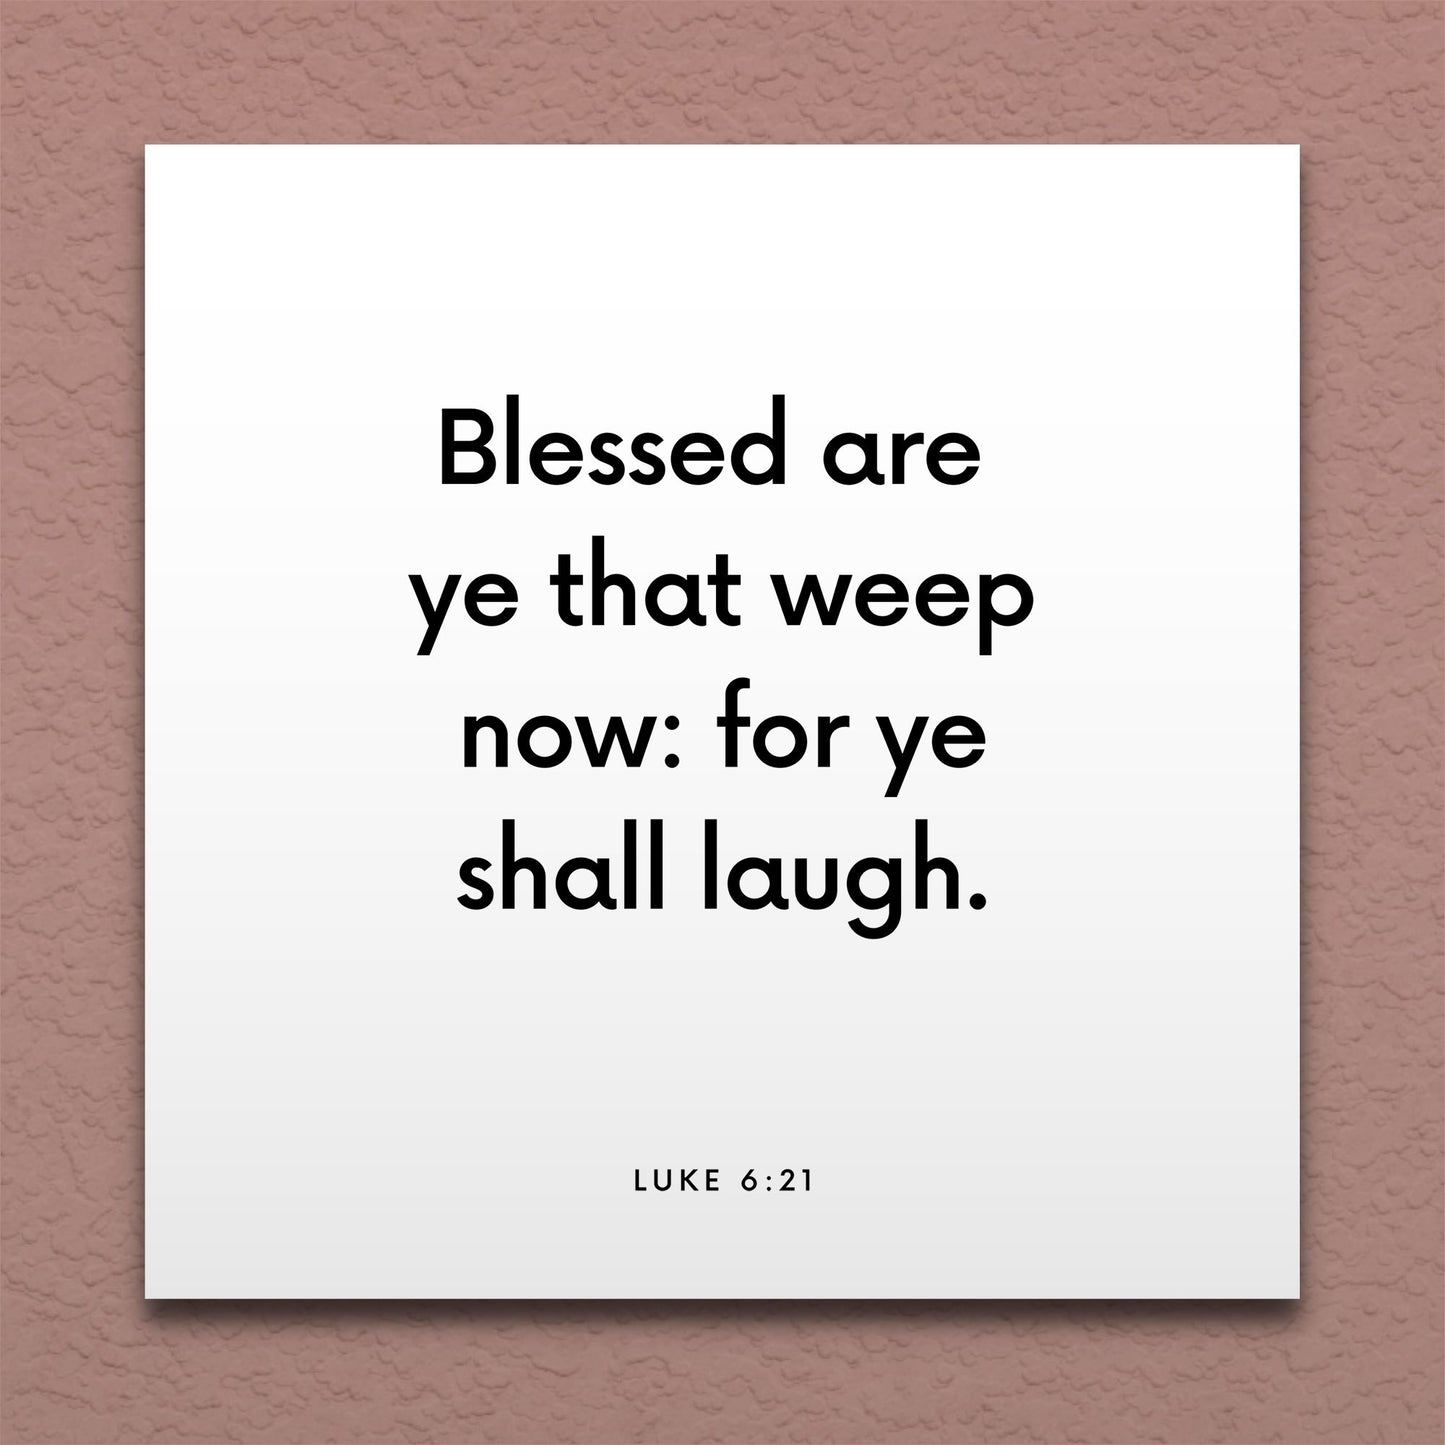 Wall-mounted scripture tile for Luke 6:21 - "Blessed are ye that weep now: for ye shall laugh"